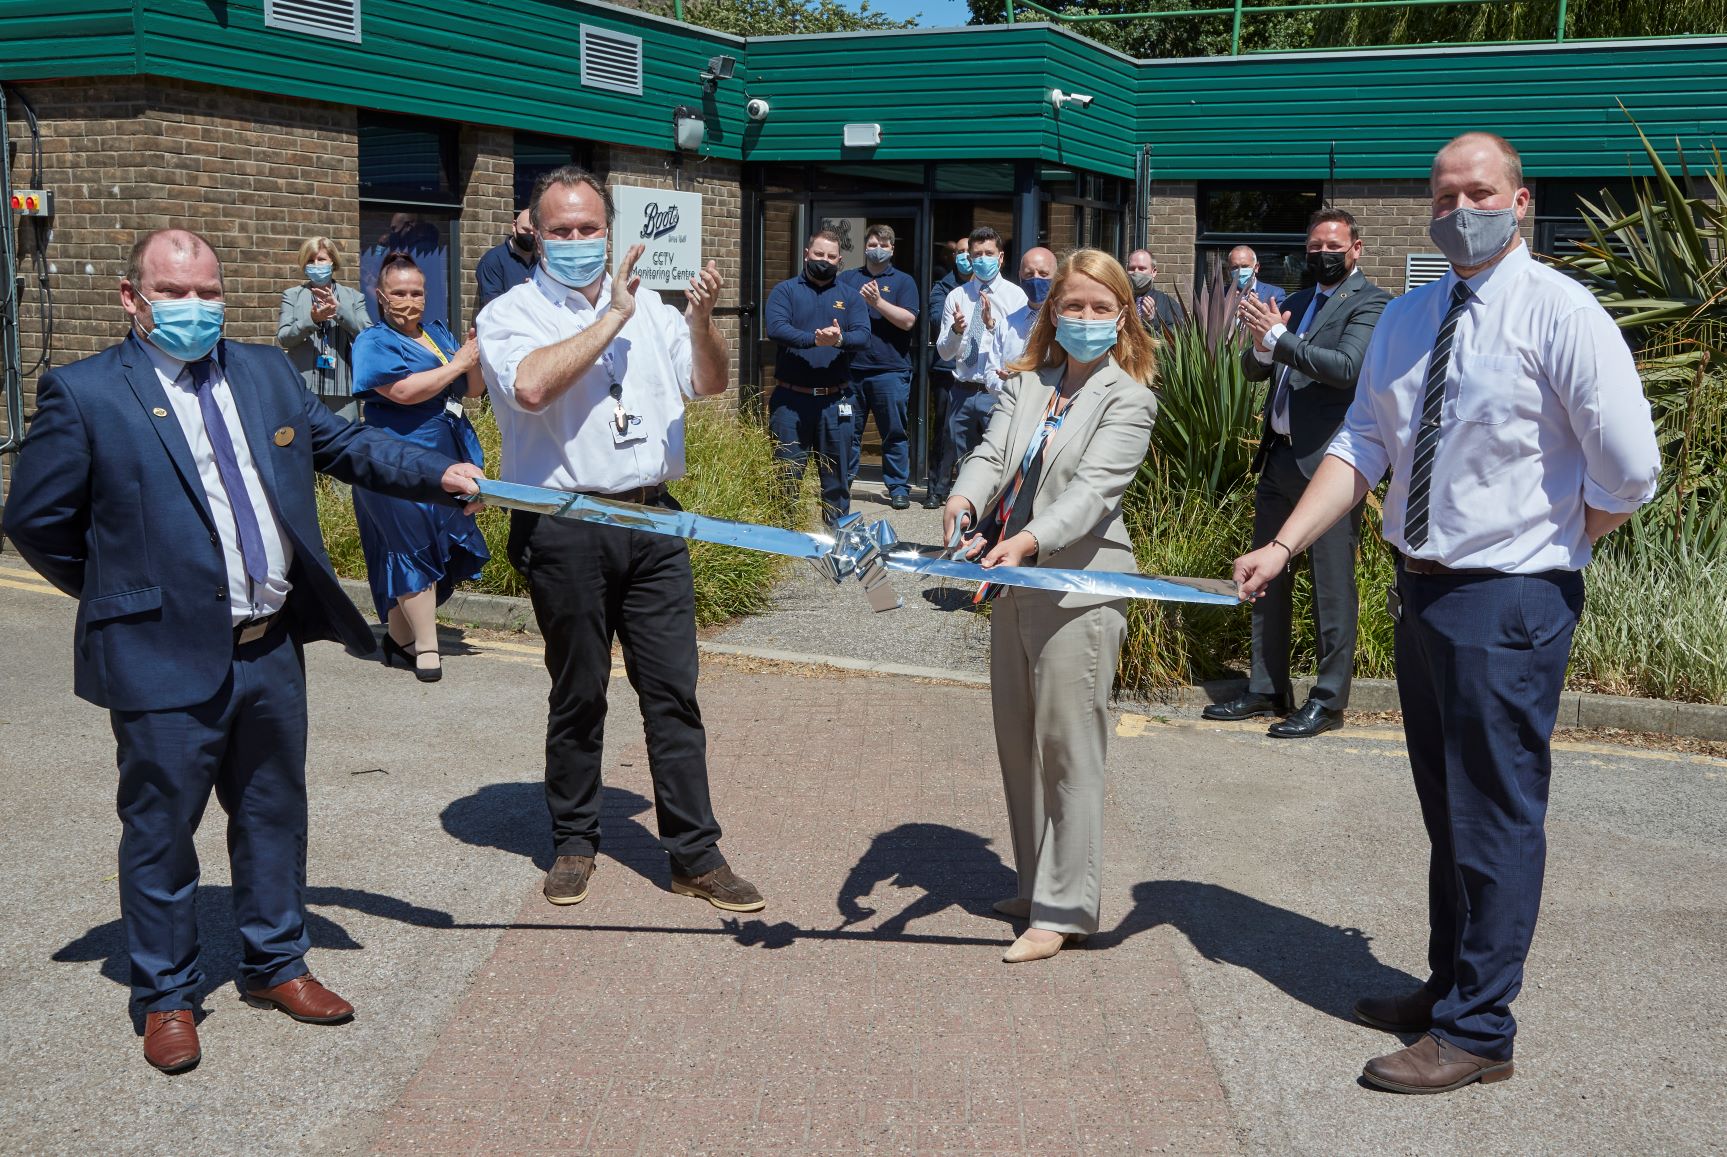 Seb James, Katy Bourne OBE and Boots team members officially open the CCTV Monitoring Centre